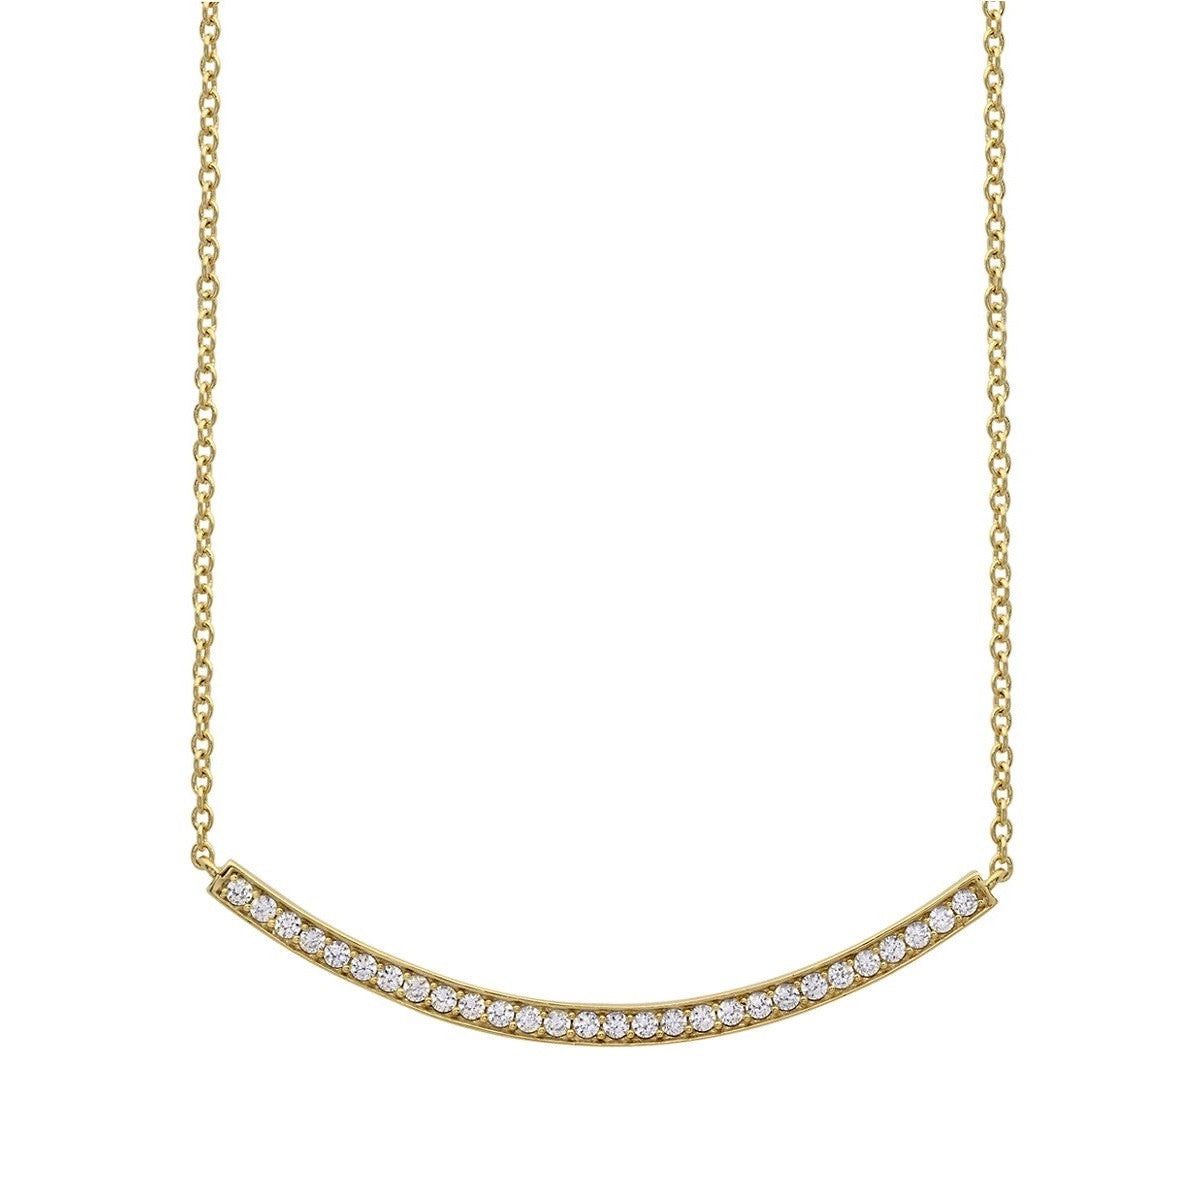 CRISLU Gold Vermeil Bar Necklace Layer this slim sparkly piece with longer necklaces for elegant chic.